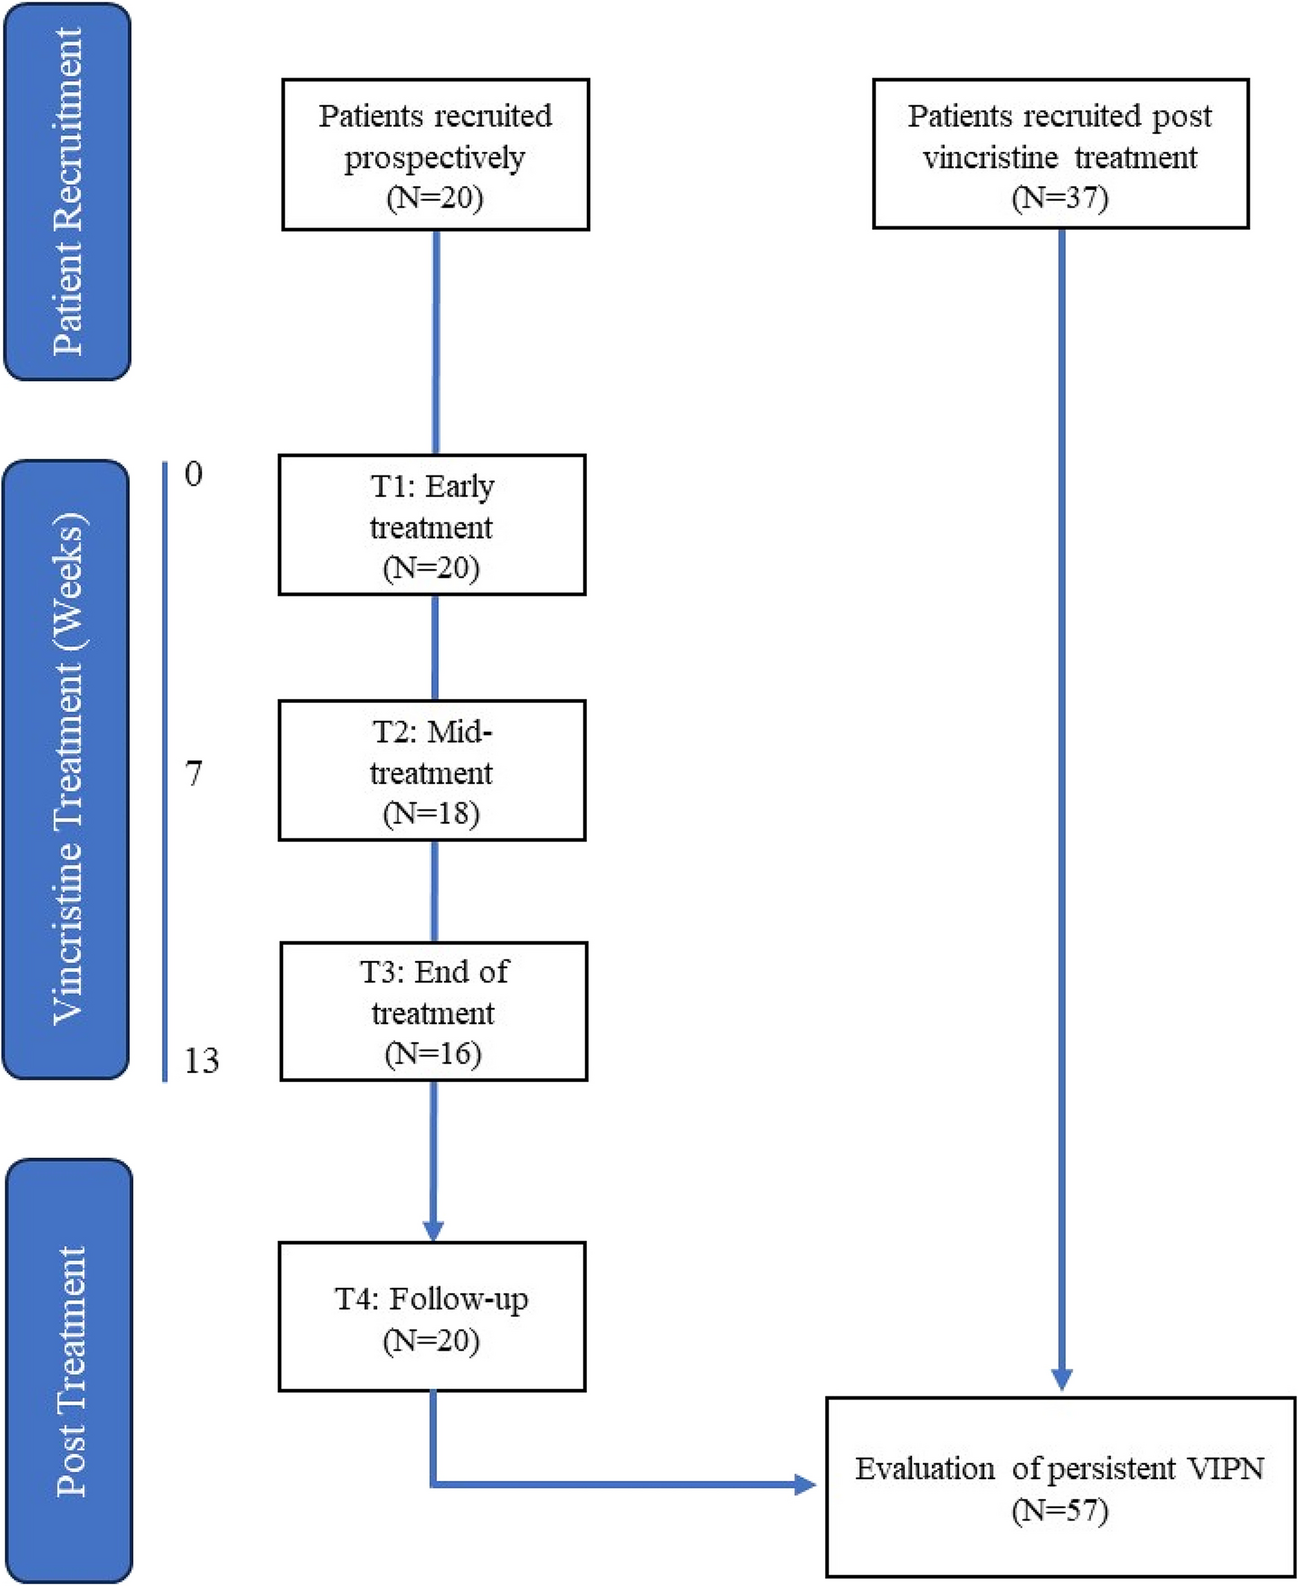 Characterising vincristine-induced peripheral neuropathy in adults: symptom development and long-term persistent outcomes